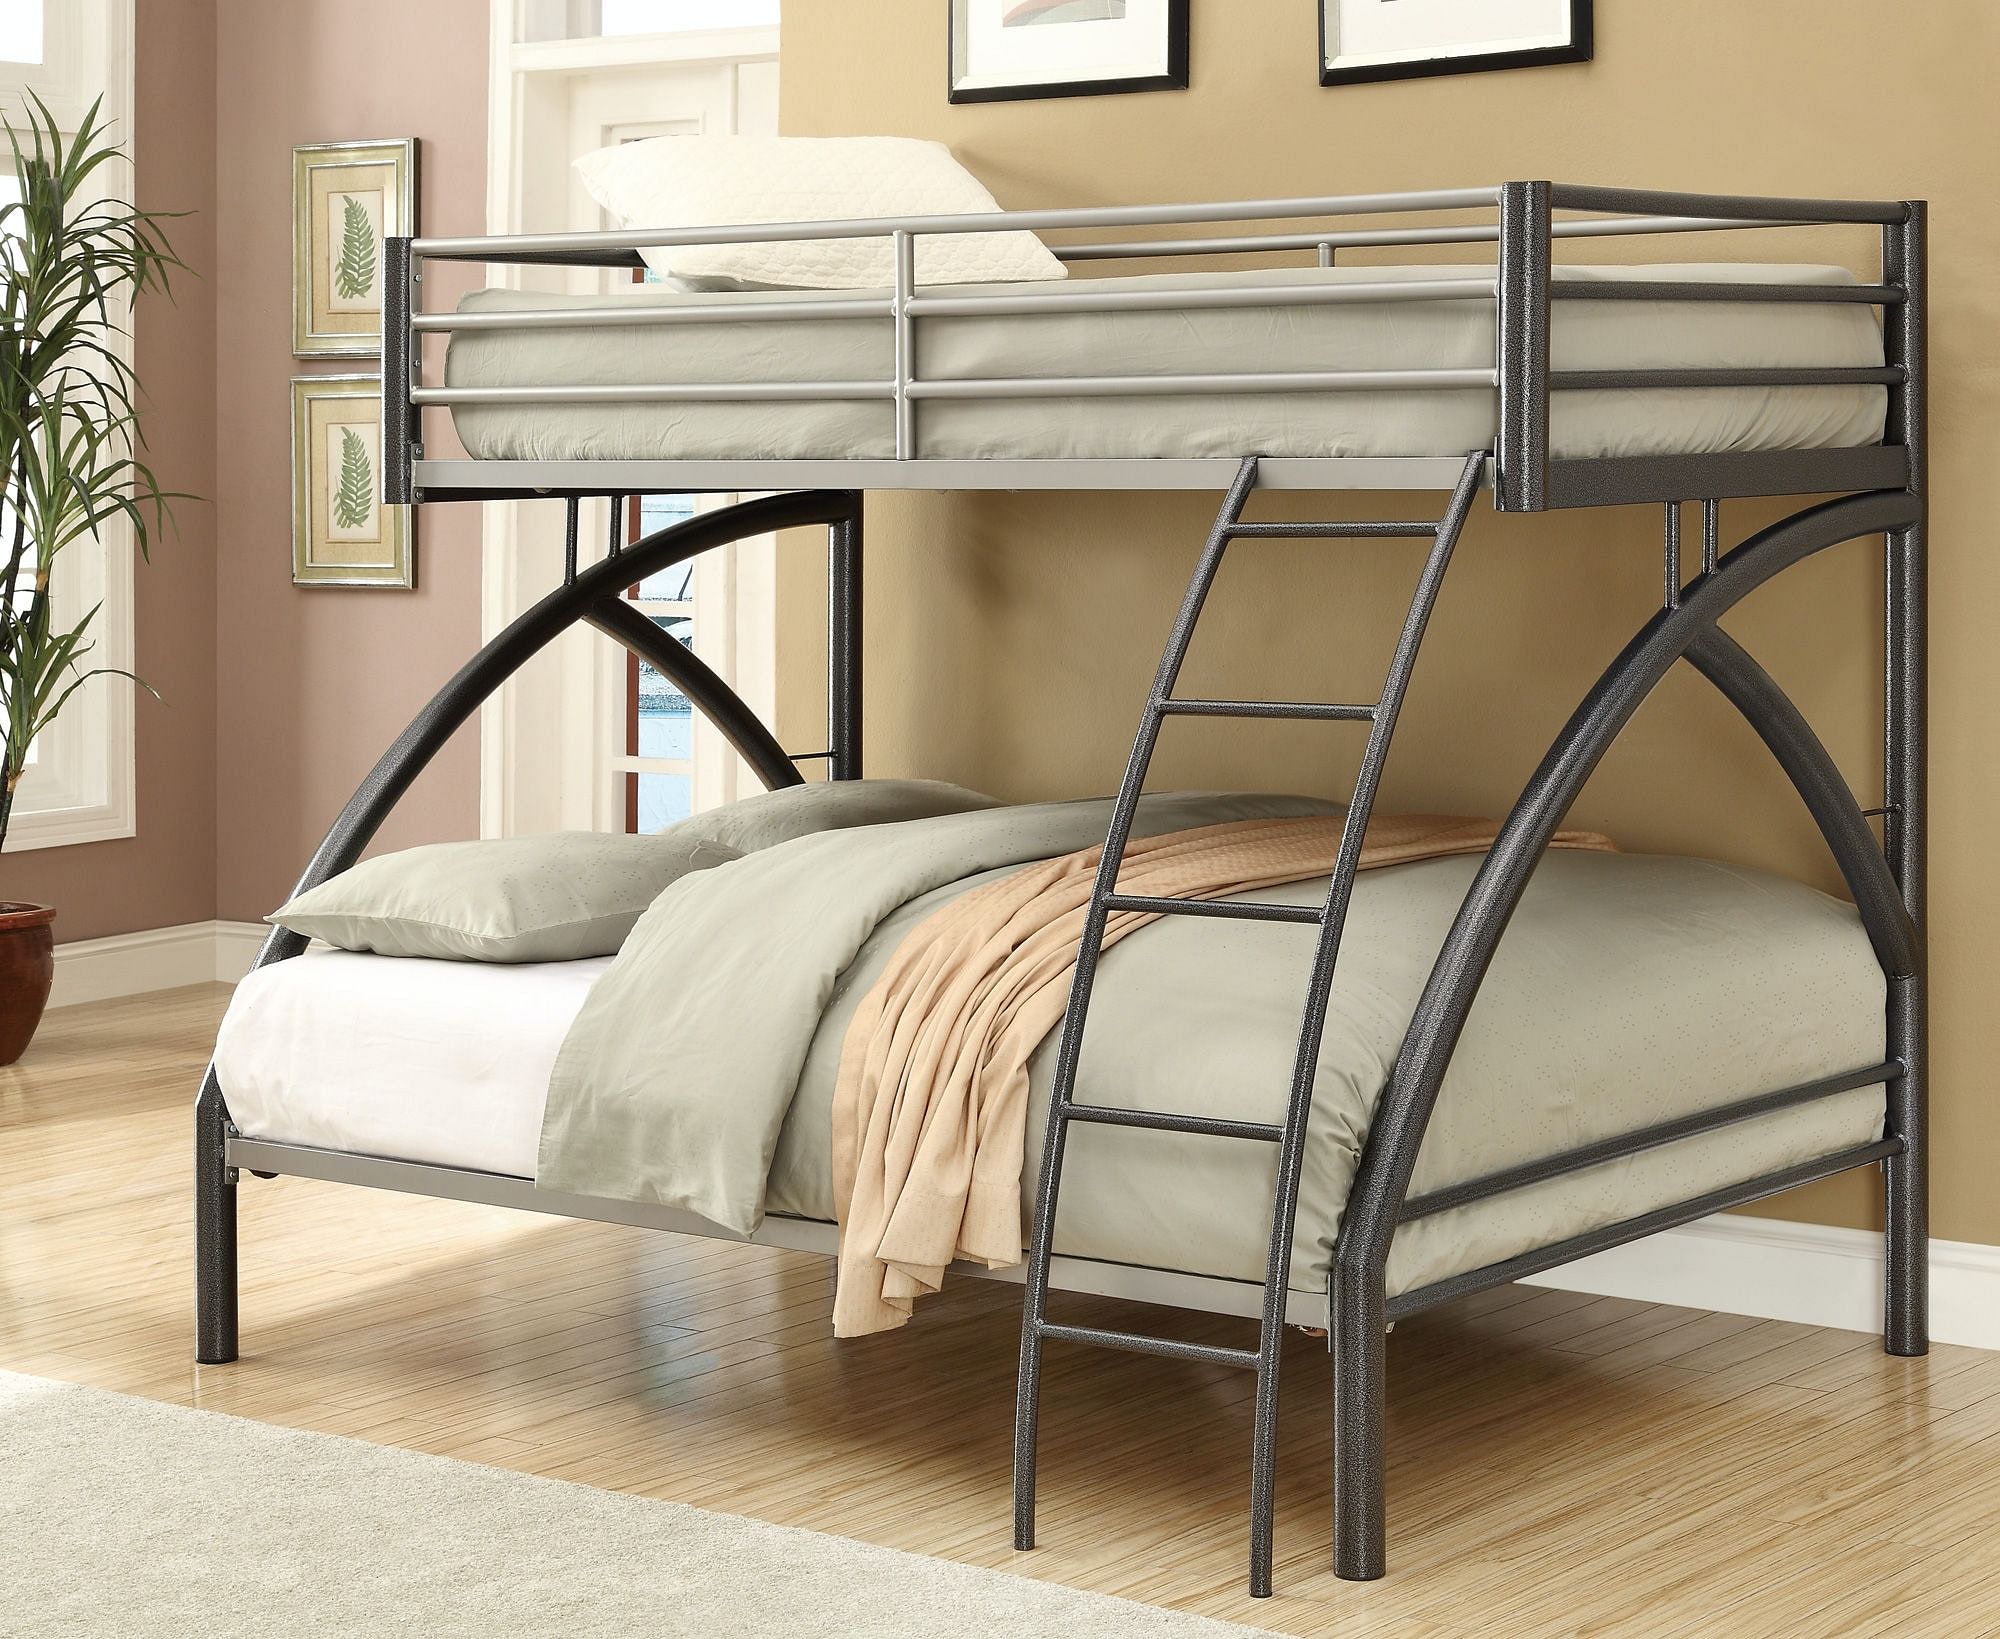 Coaster Youth Twin/Full Bunk Bed 460079